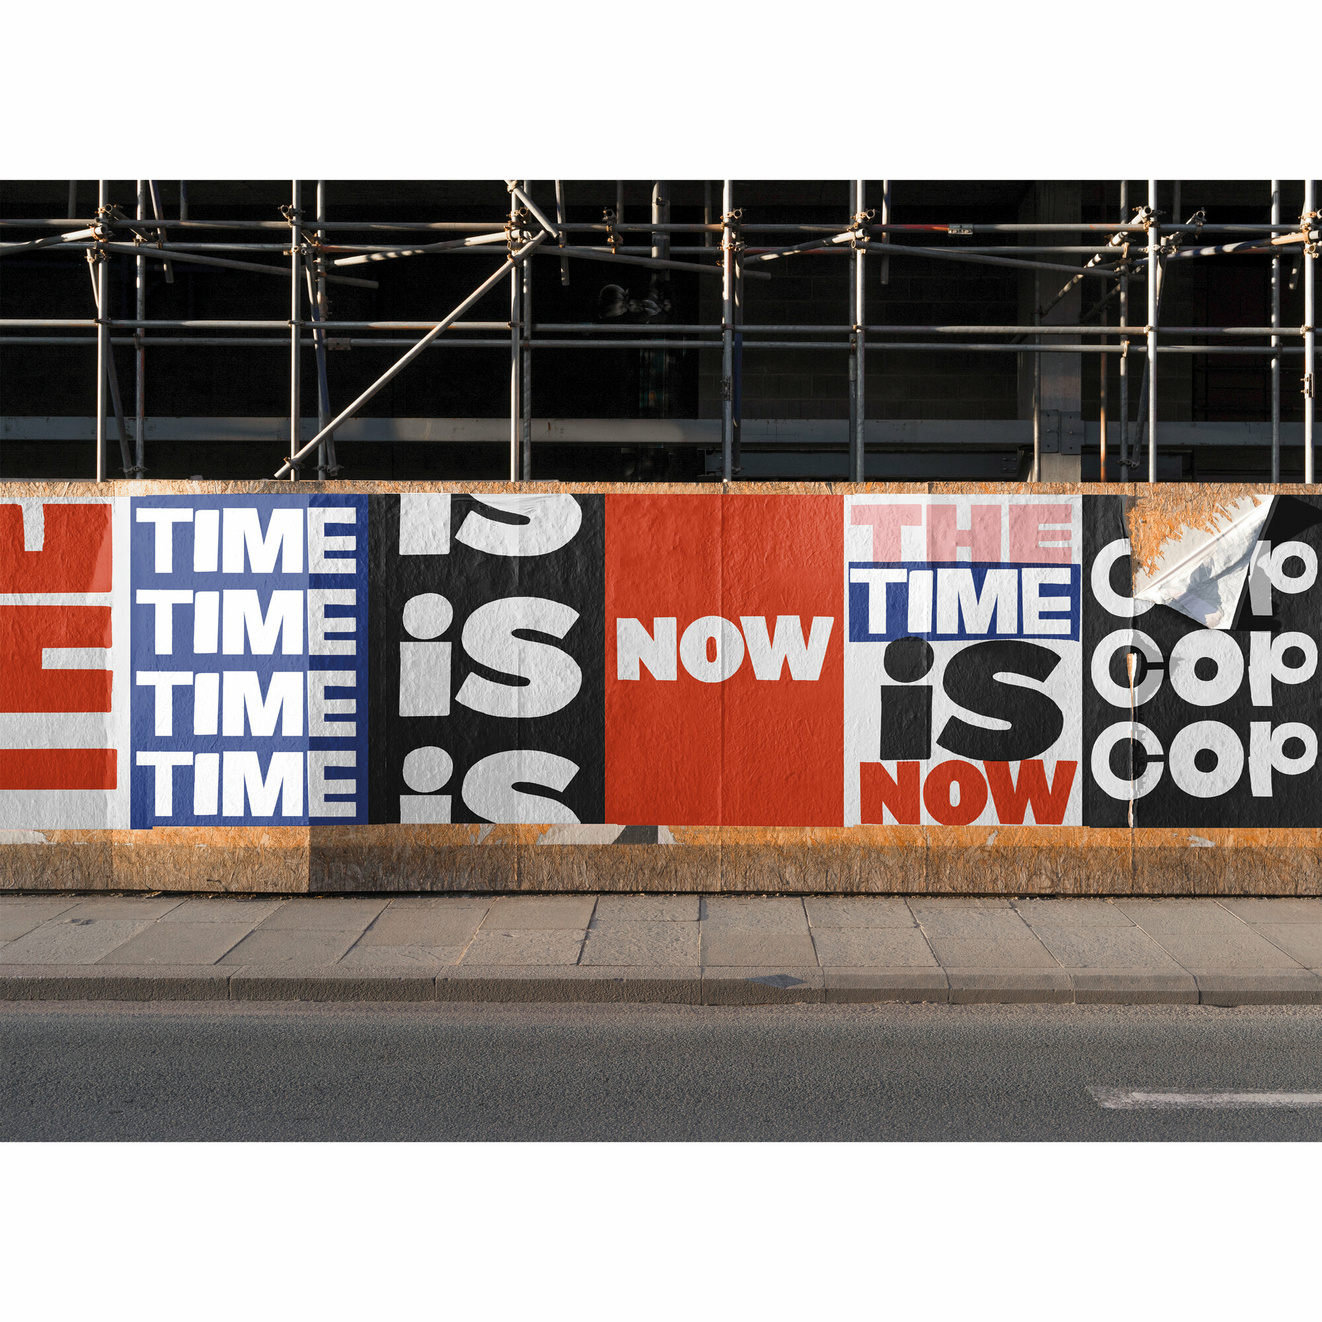 The time is now/Cop 26